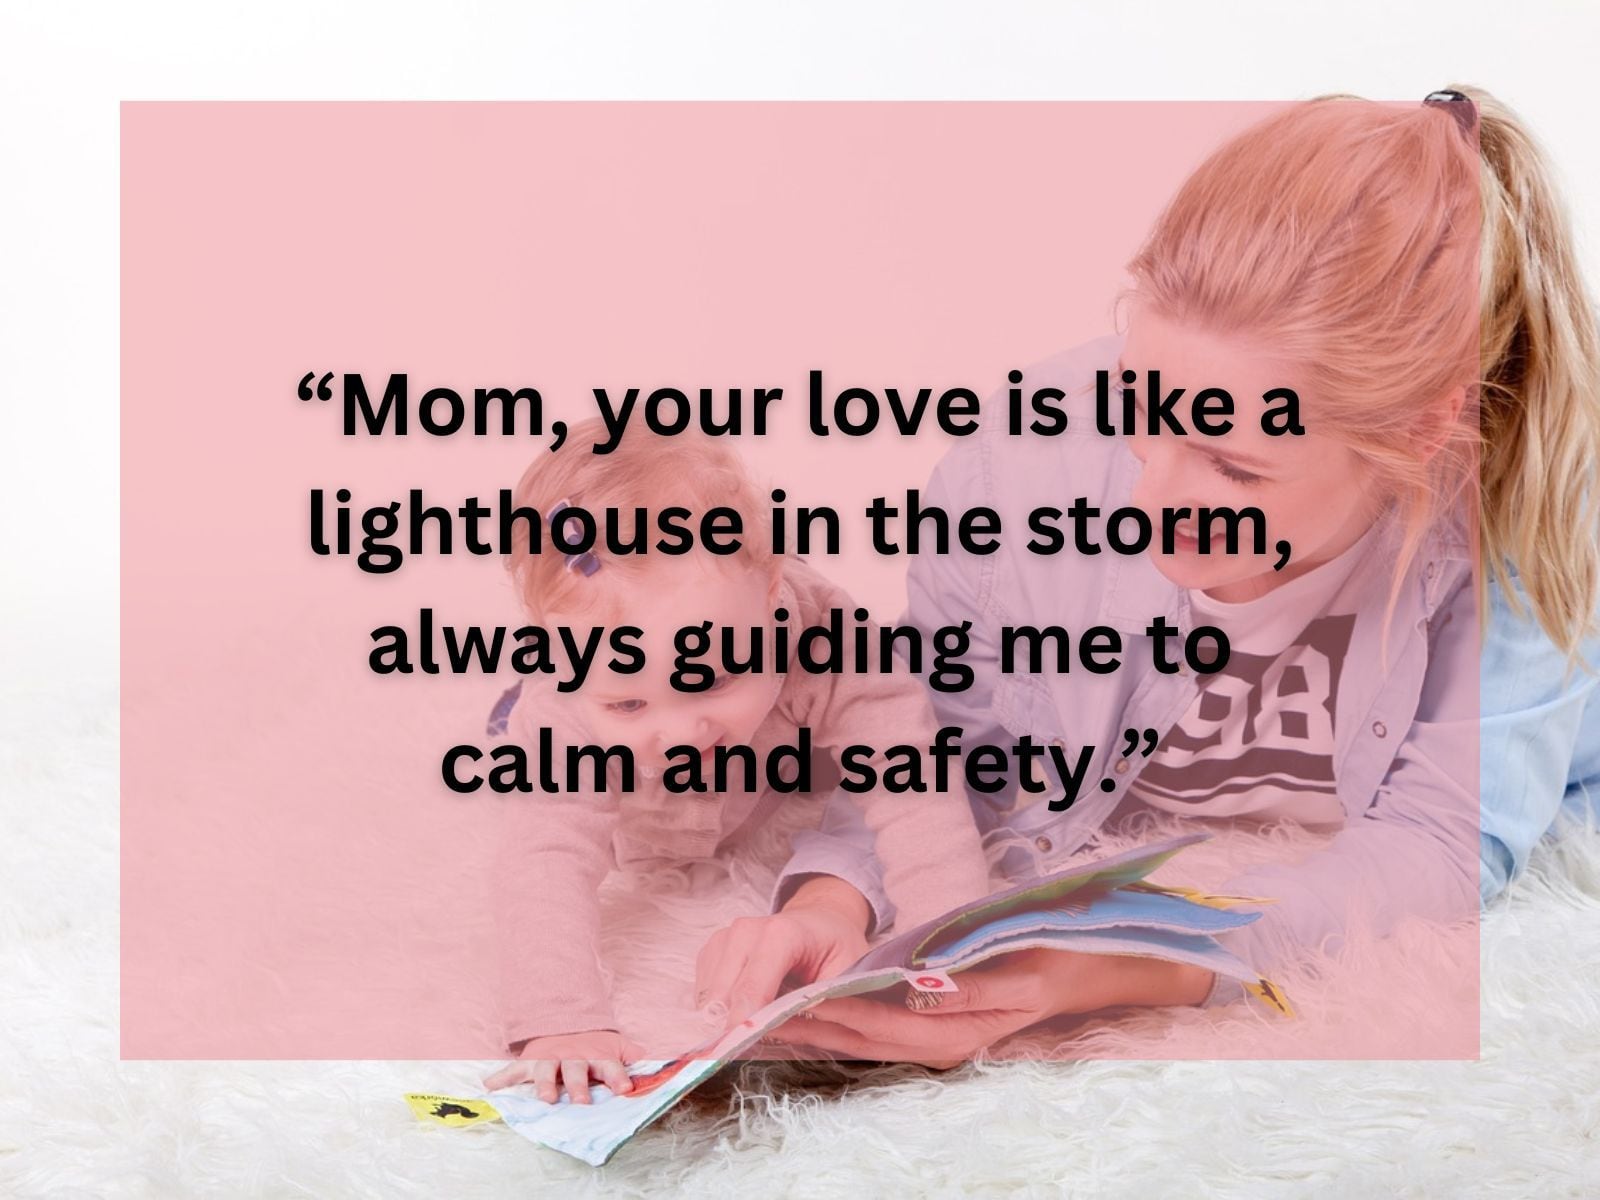 100 Heartfelt Mother’s Day Quotes that capture the essence of motherhood